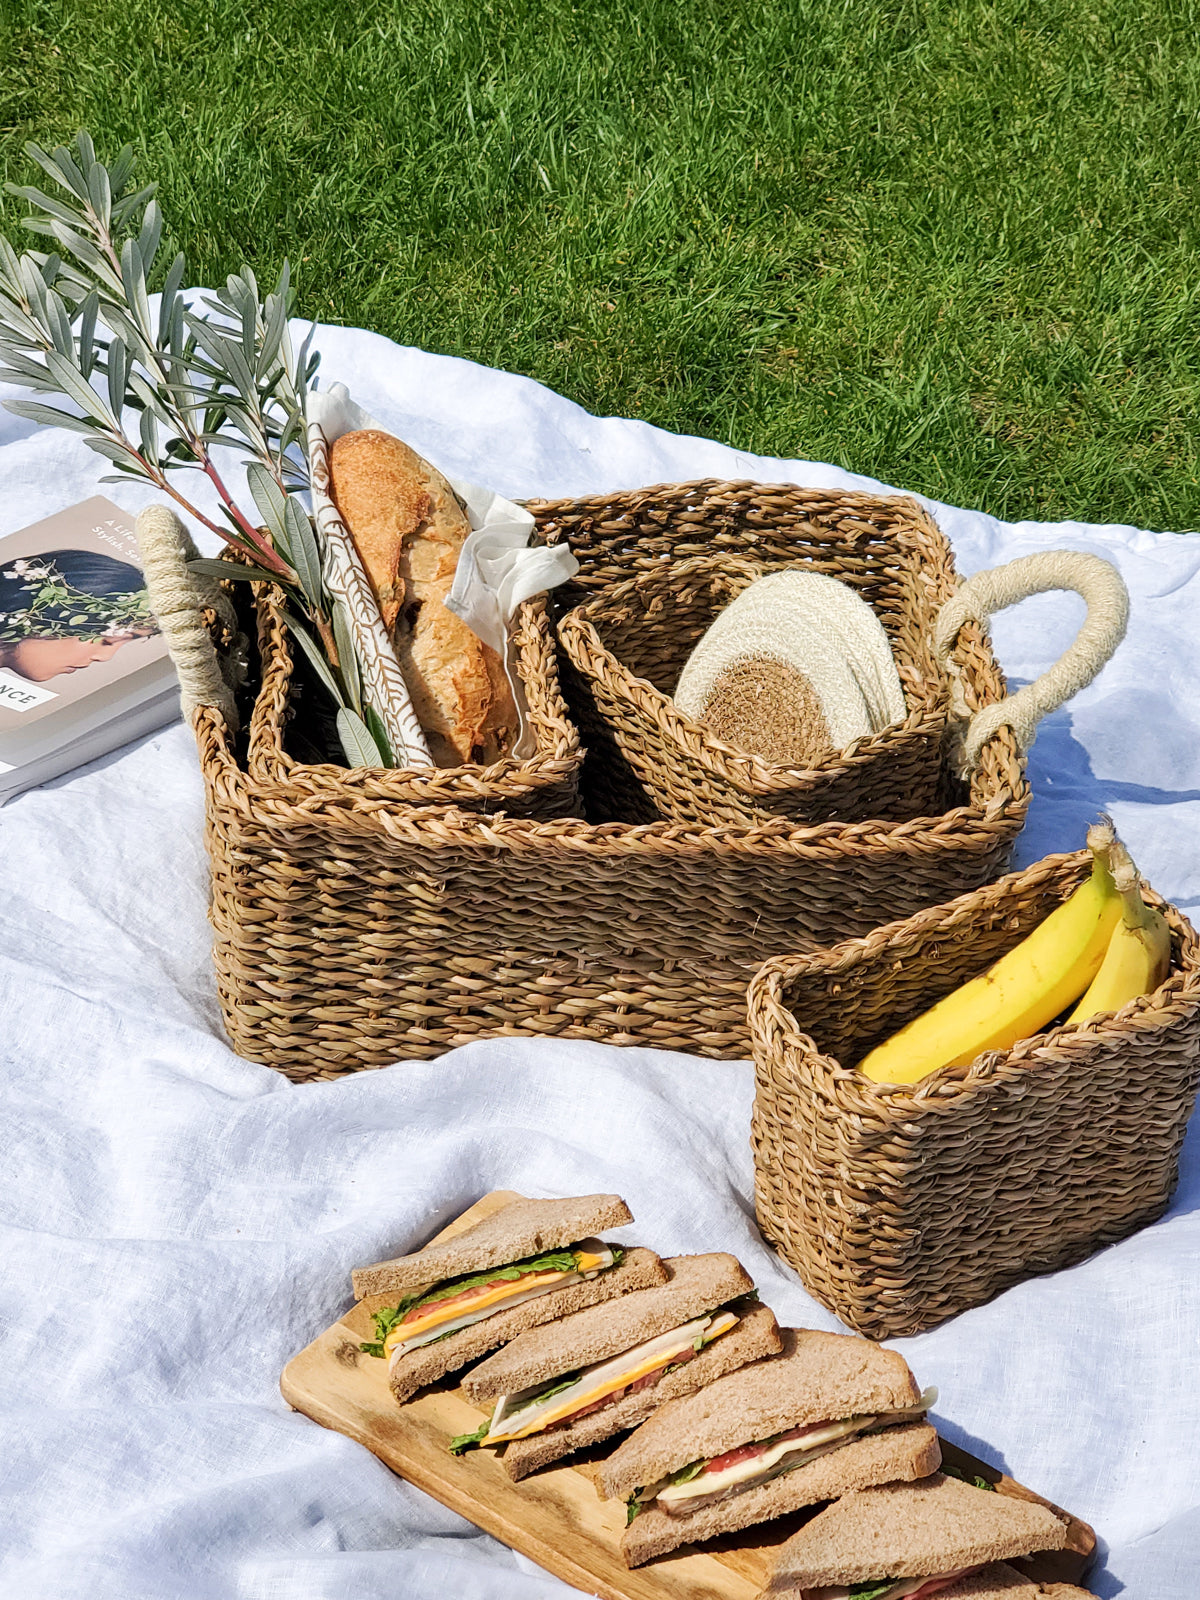 Stylish - with hand rope jute wool - and multifunctional use for everything from a picnic basket to organizing cosmetics, art and crafts, utensils, and small household items.